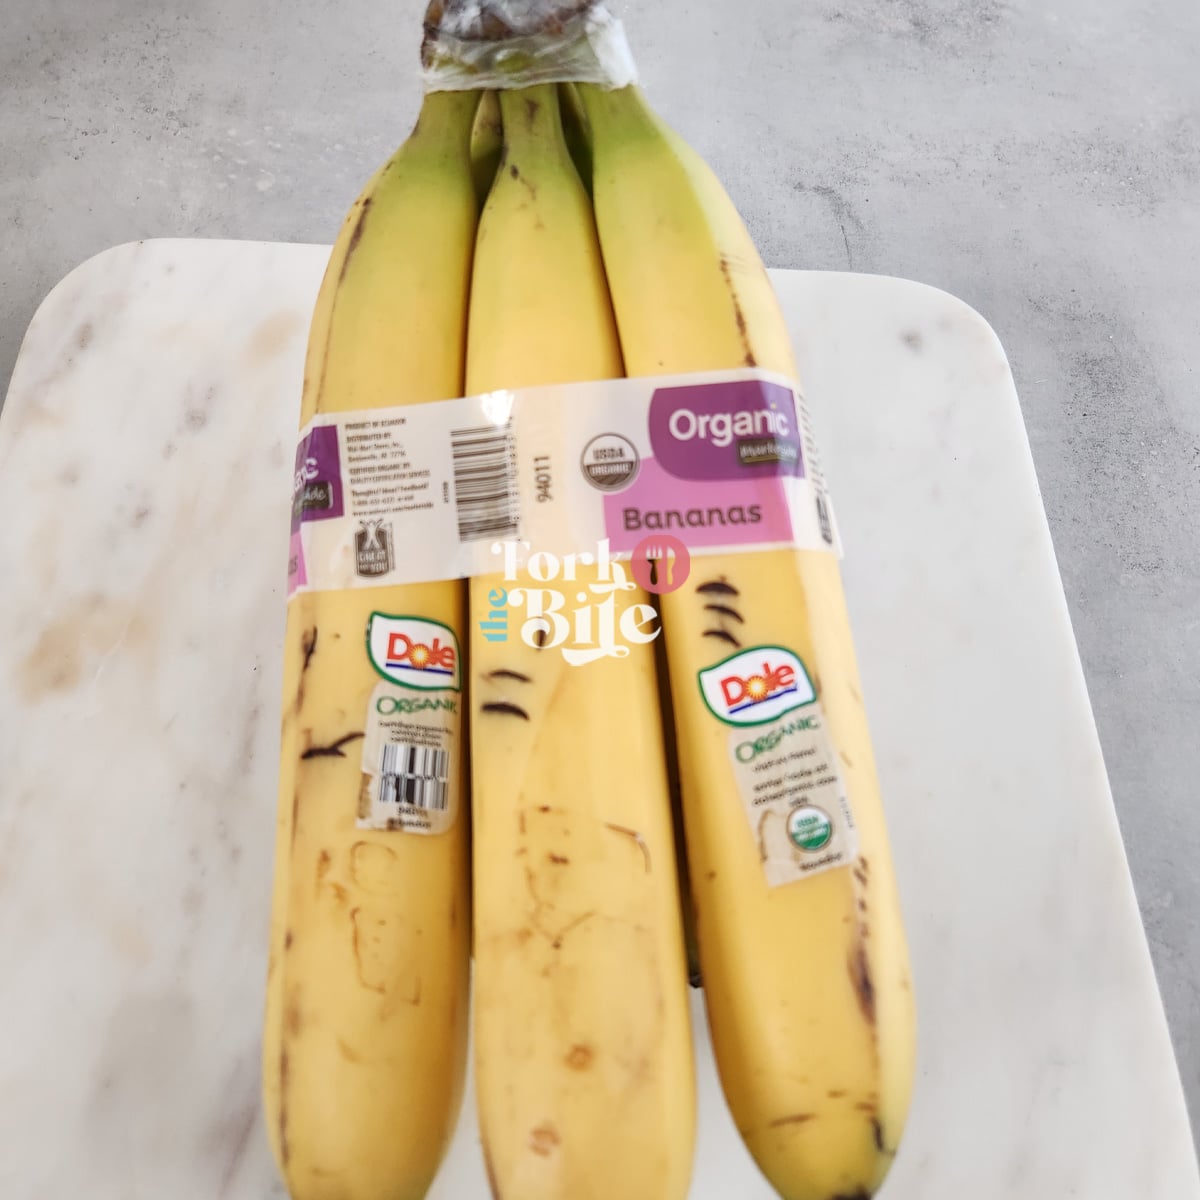 For this recipe, it's best to use ripe bananas. These bananas will be sweet and flavorful, with a soft texture that will blend well into the pudding.